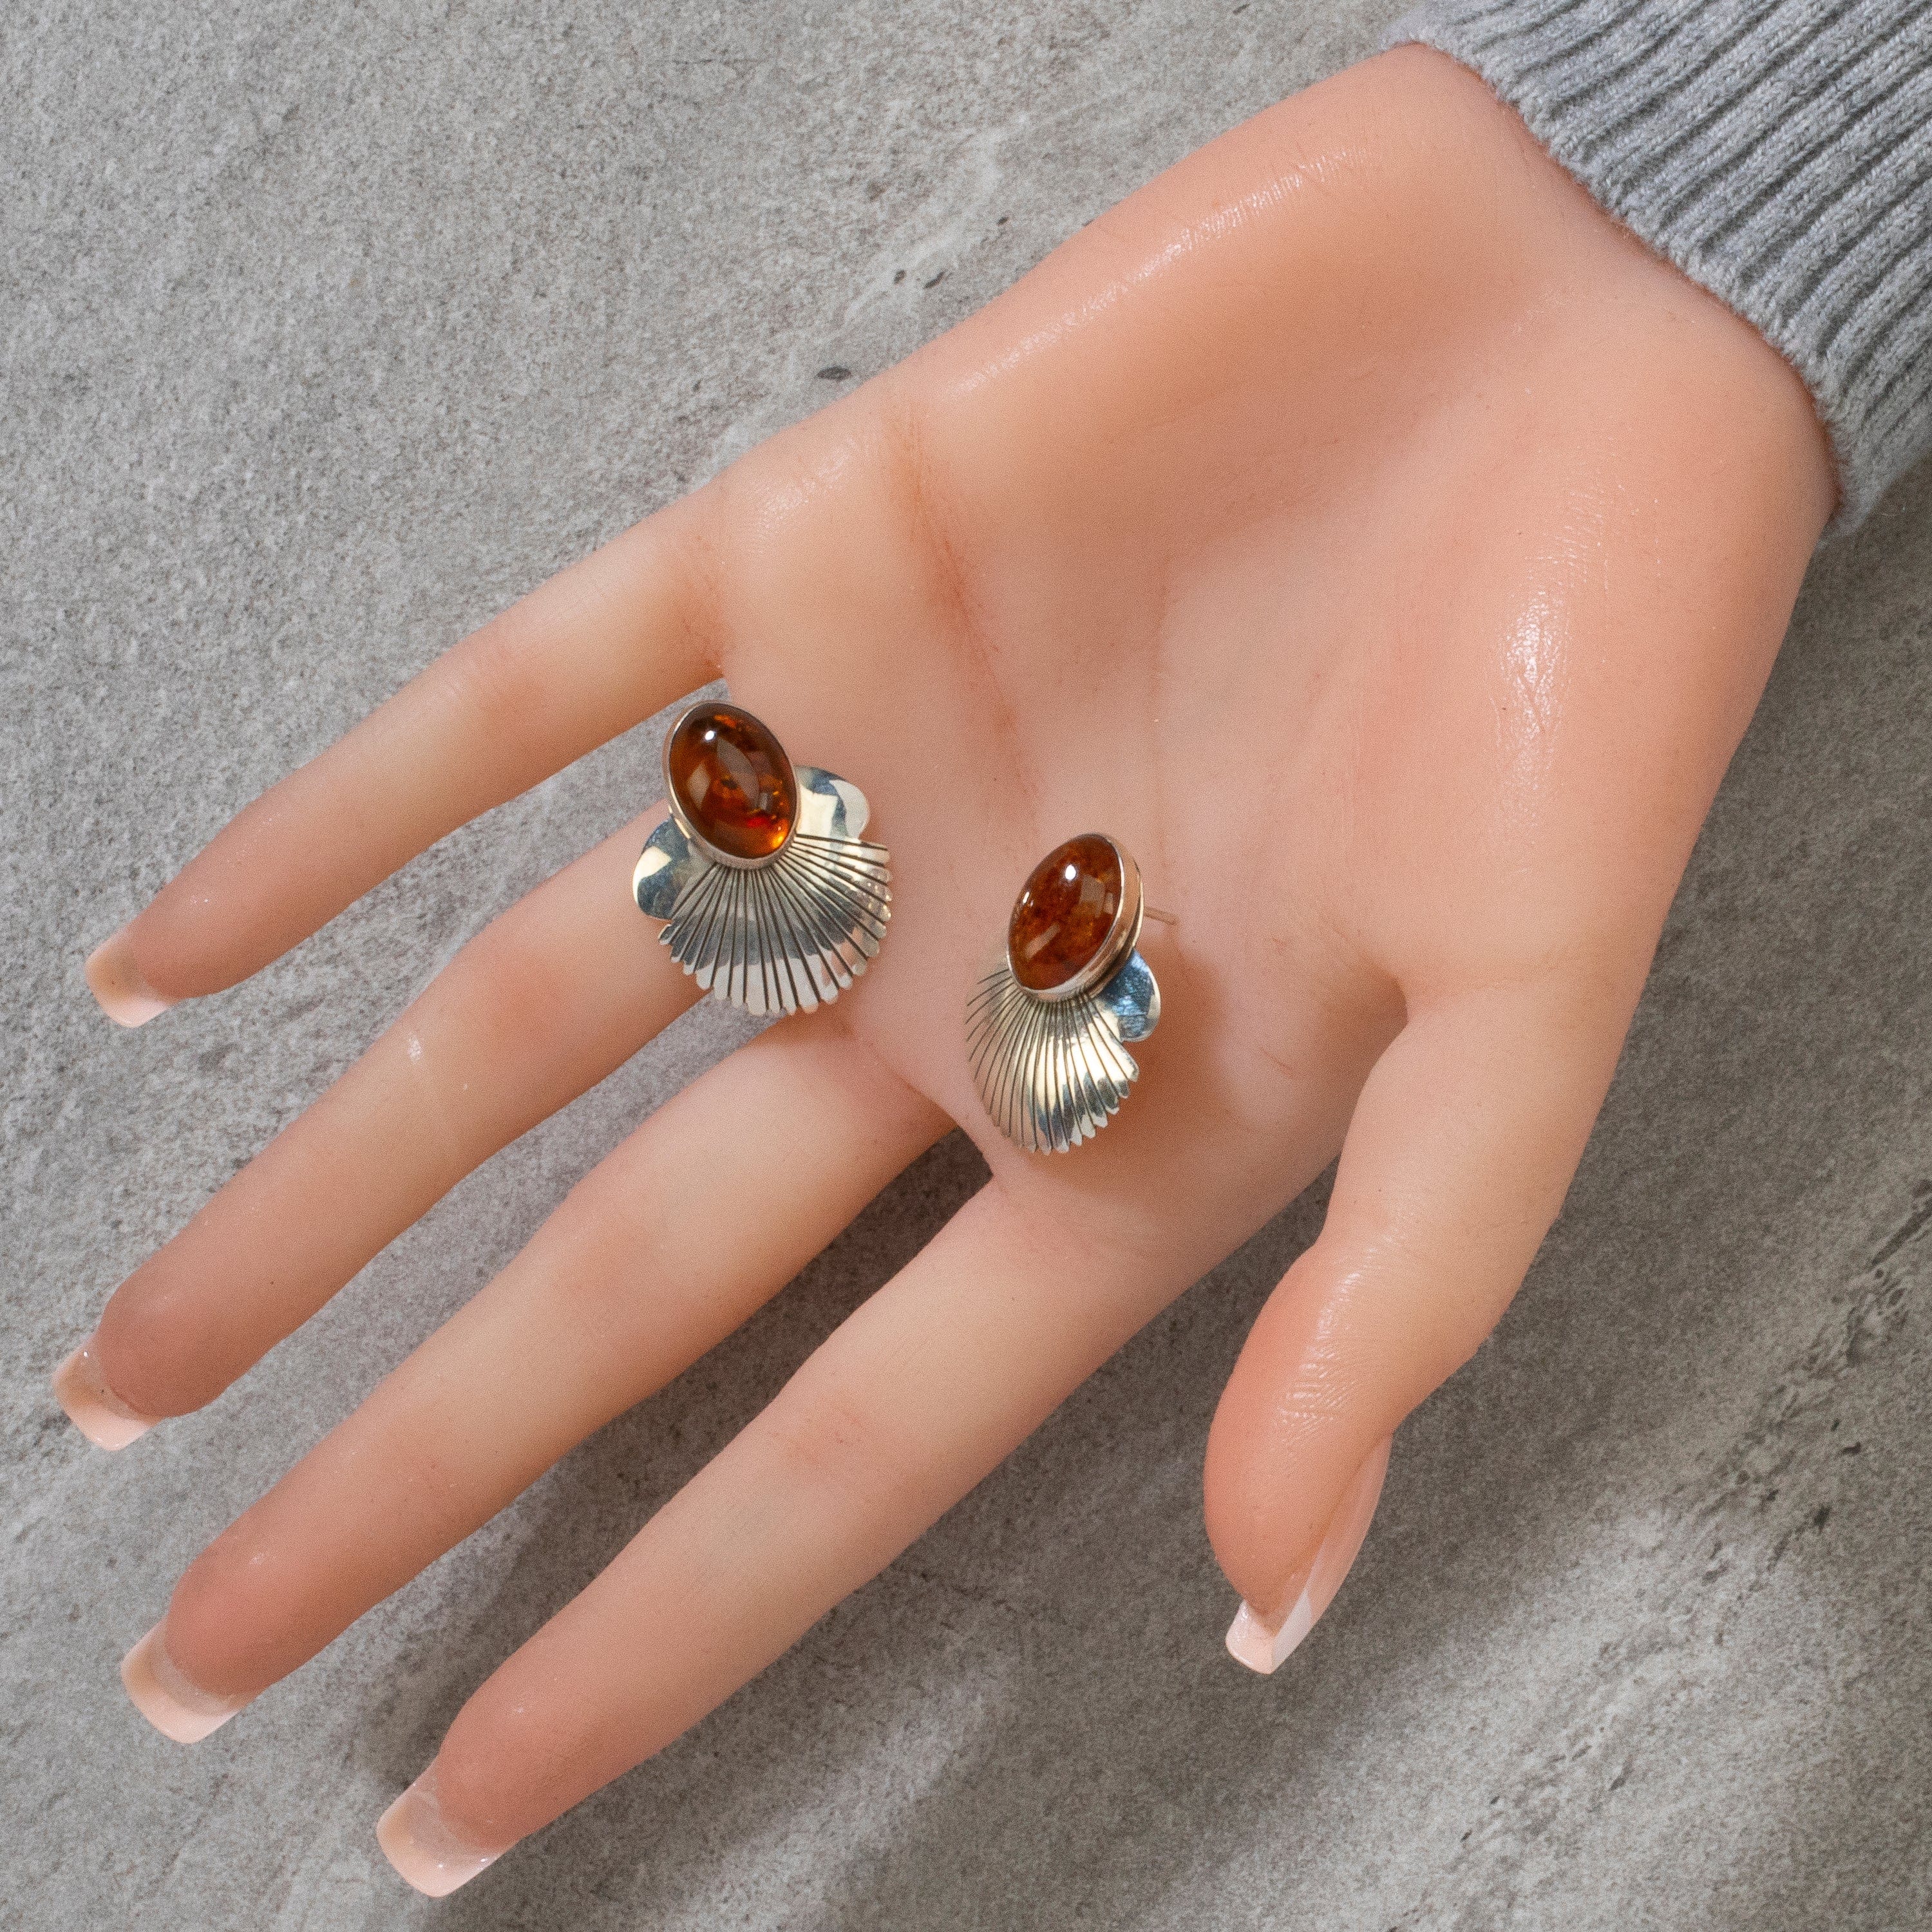 Kalifano Native American Jewelry Baltic Amber Navajo USA Native American Made 925 Sterling Silver Earrings with Stud Backing NAE300.023